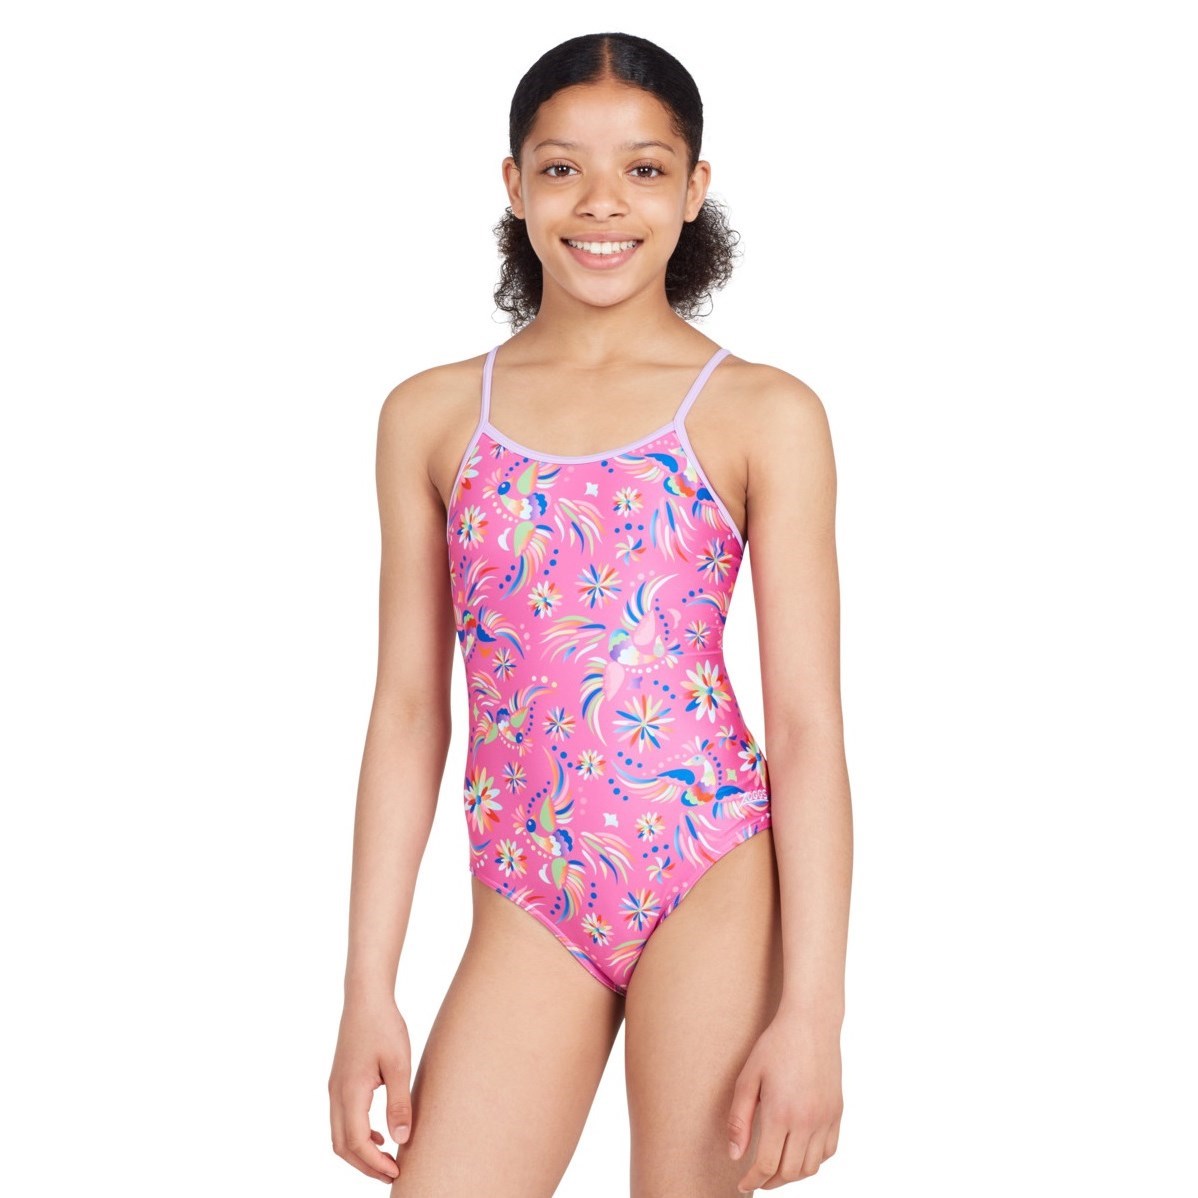 Zoggs Toddler Girls PLAY WAVE SCOOPBACK One Piece Swimwear 